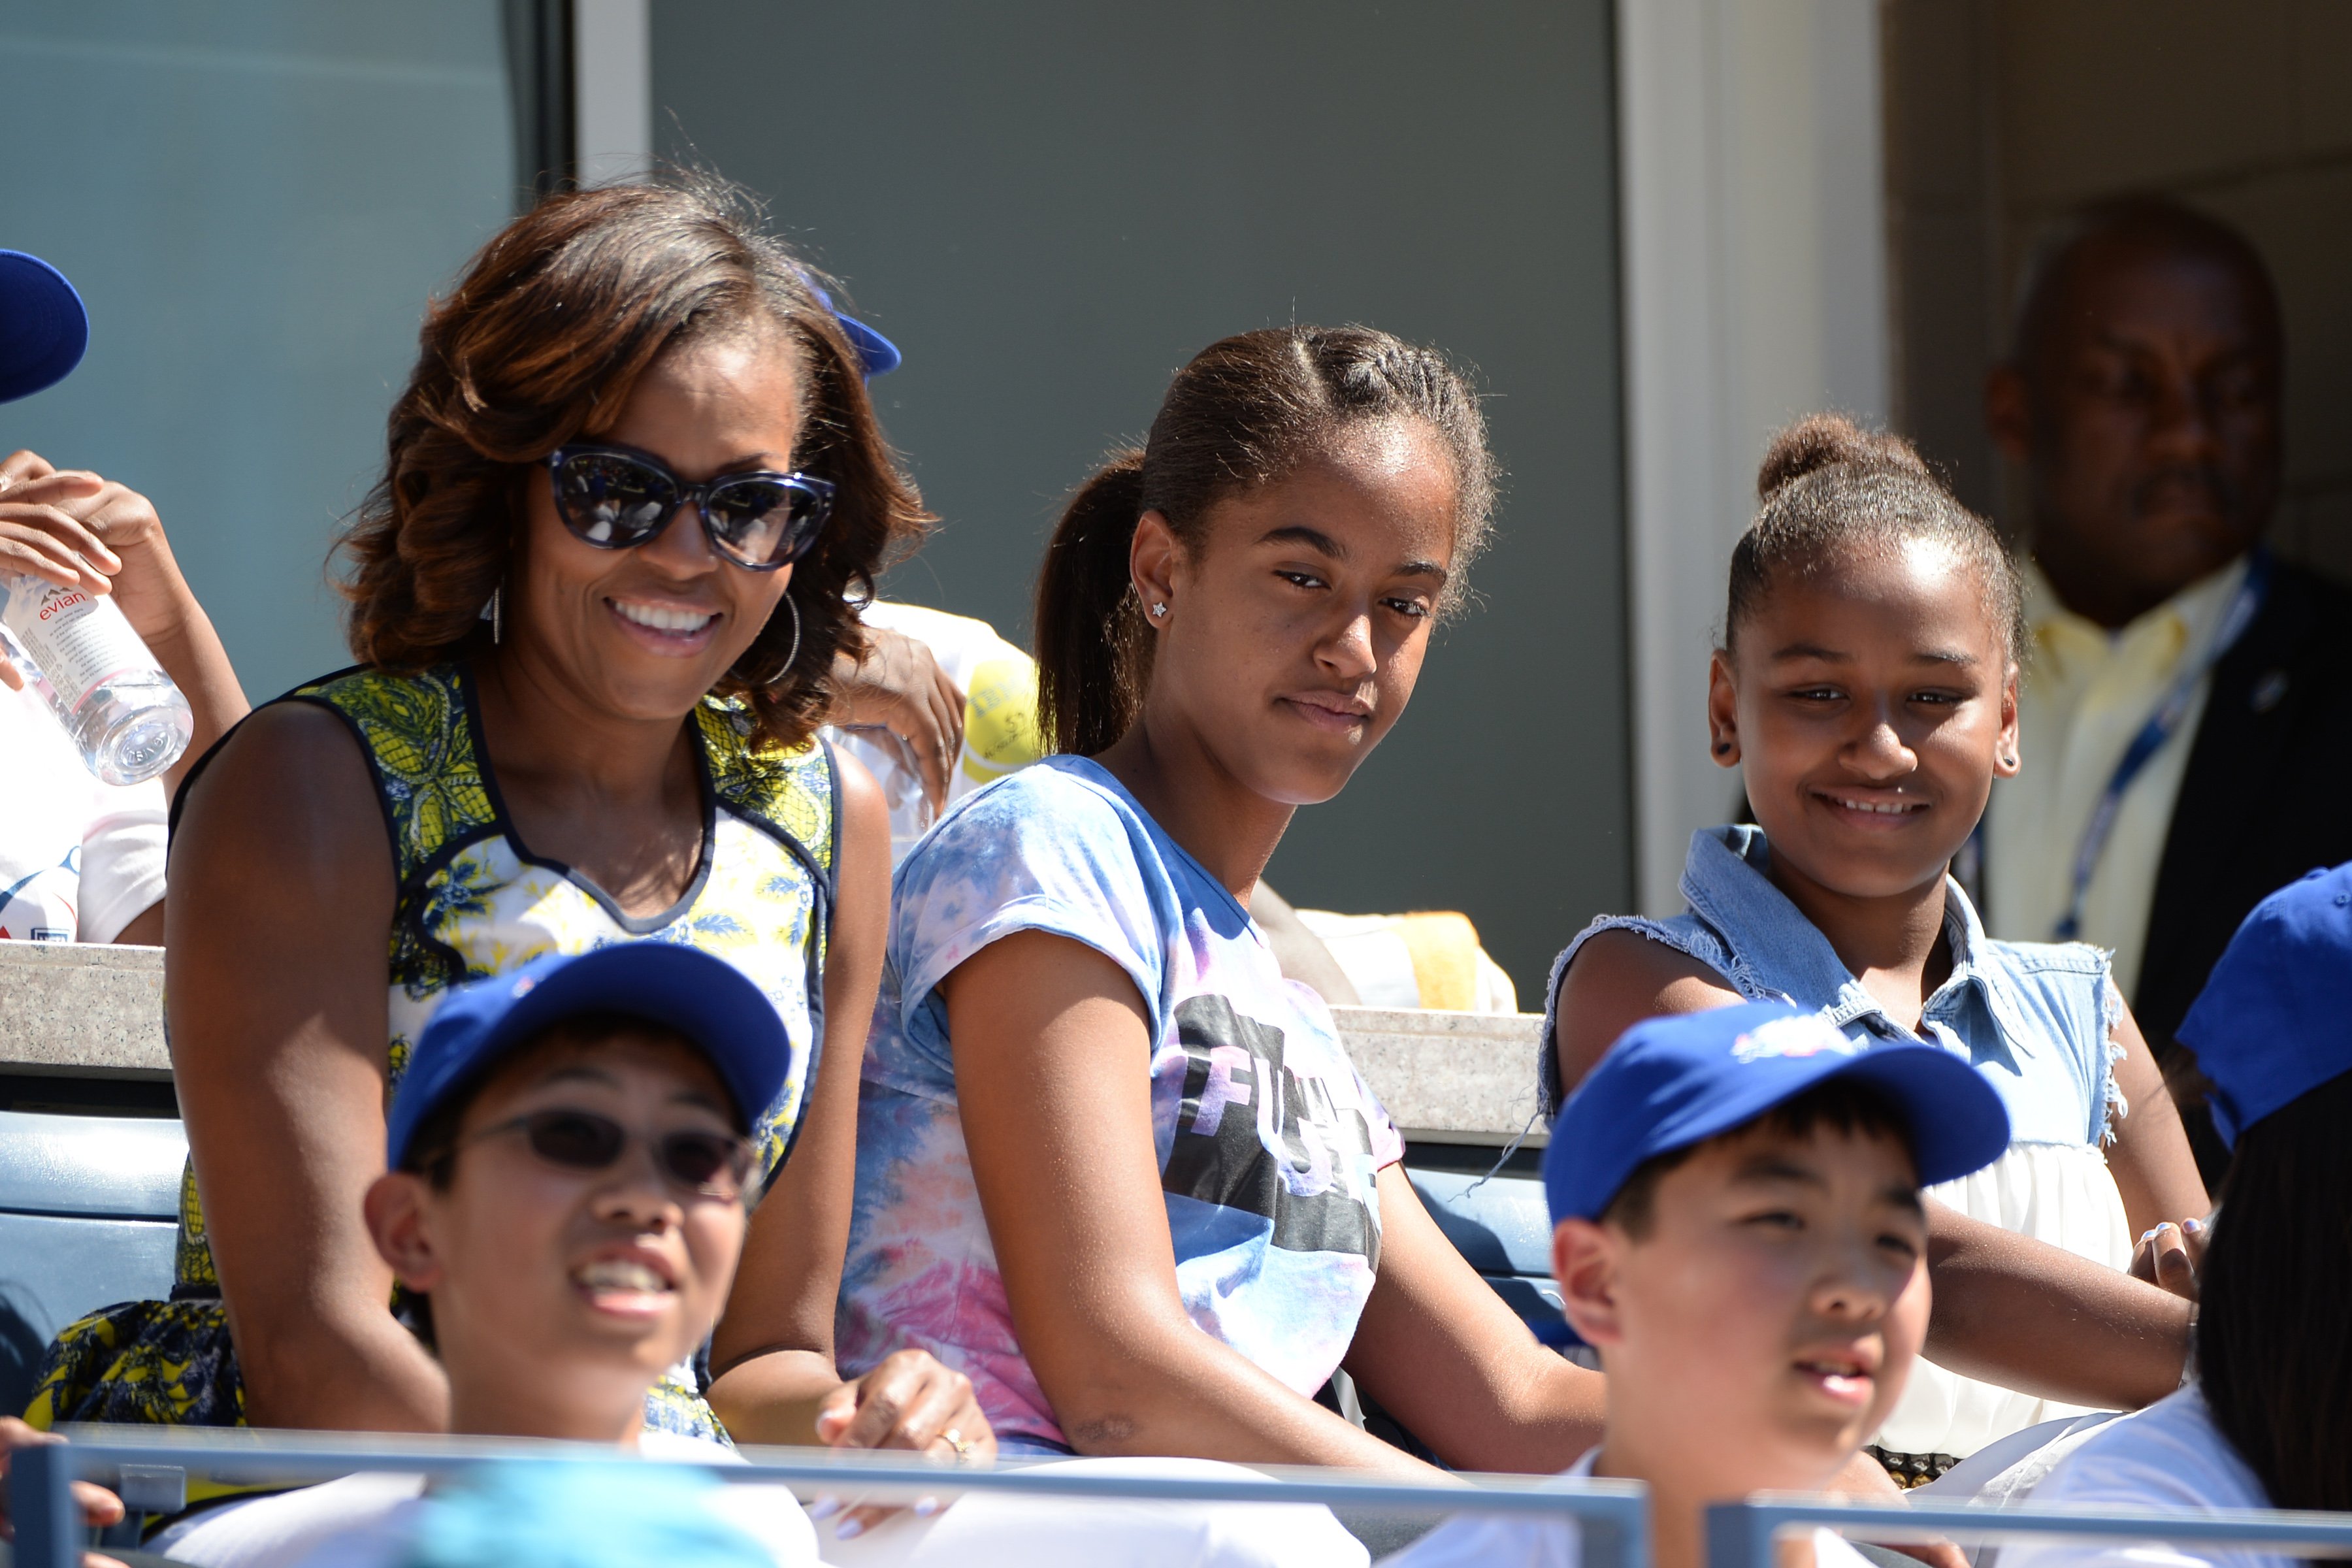 Michelle Obama & daughters Sasha and Malia at the Arthur Ashe Kids Day on Aug. 24, 2013 in New York City | Photo: Getty Images